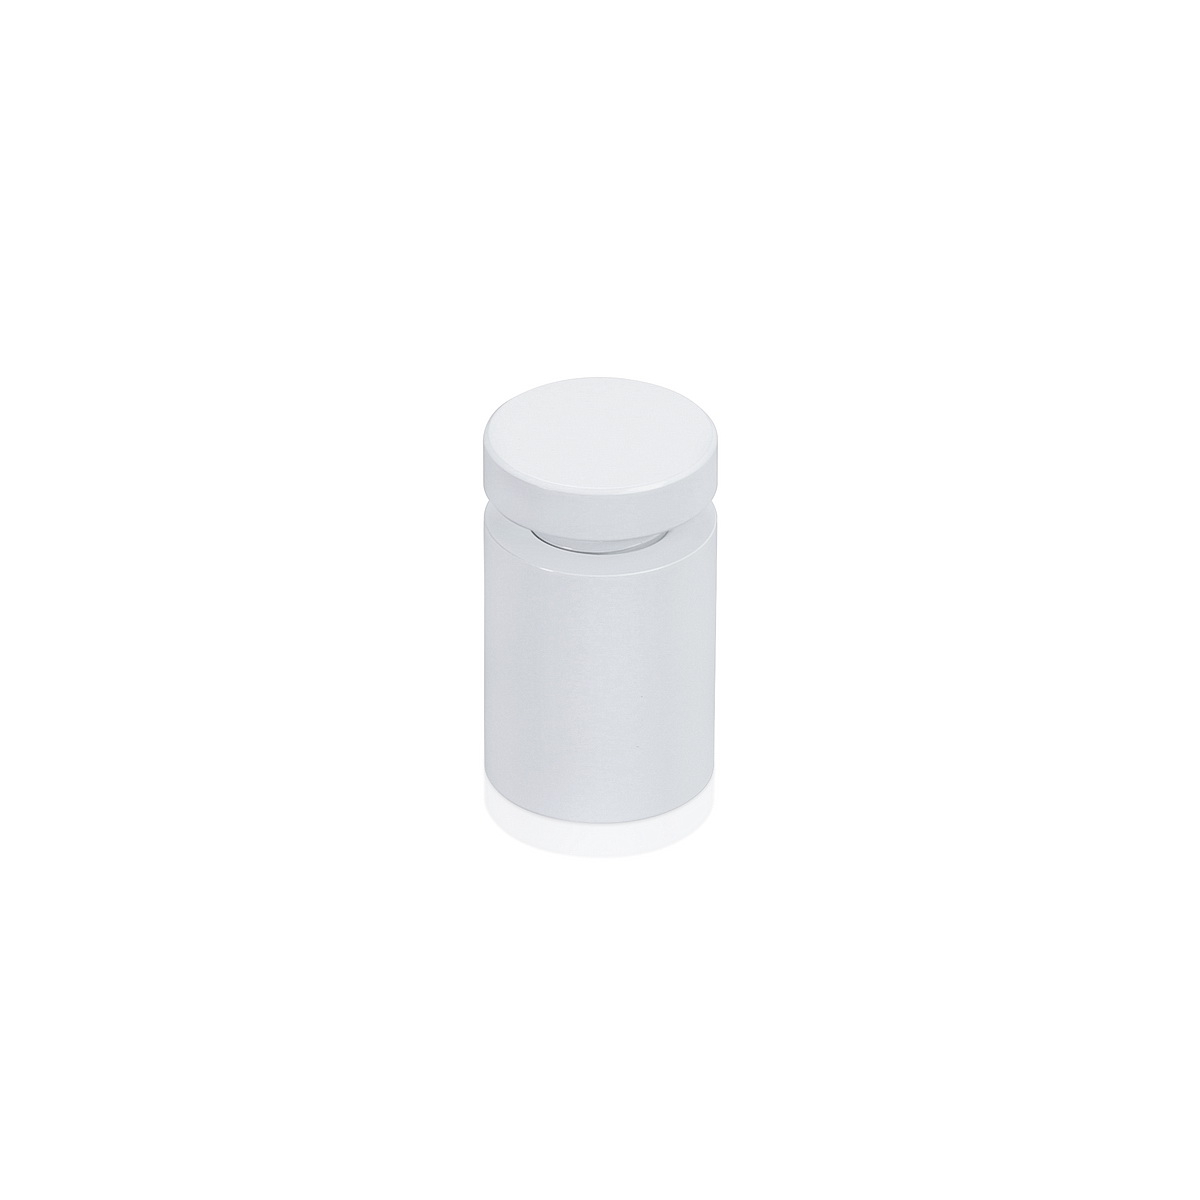 5/8'' Diameter X 3/4'' Barrel Length, Affordable Aluminum Standoffs, White Coated Finish Easy Fasten Standoff (For Inside / Outside use) [Required Material Hole Size: 7/16'']